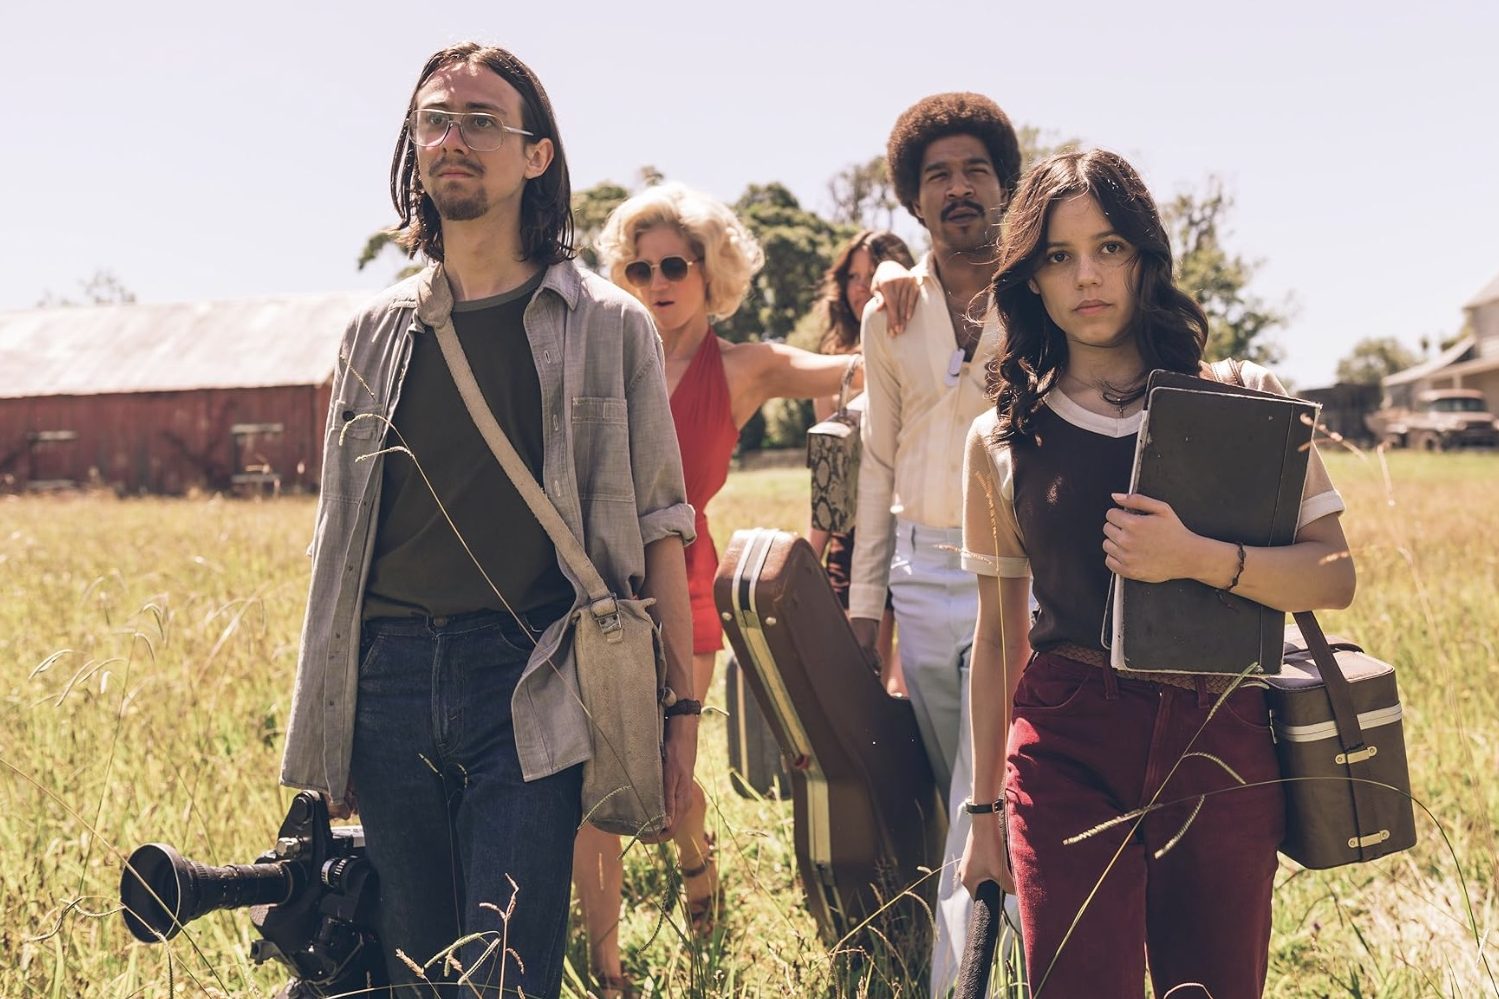 A group of people holding film equipment while walking in a field.